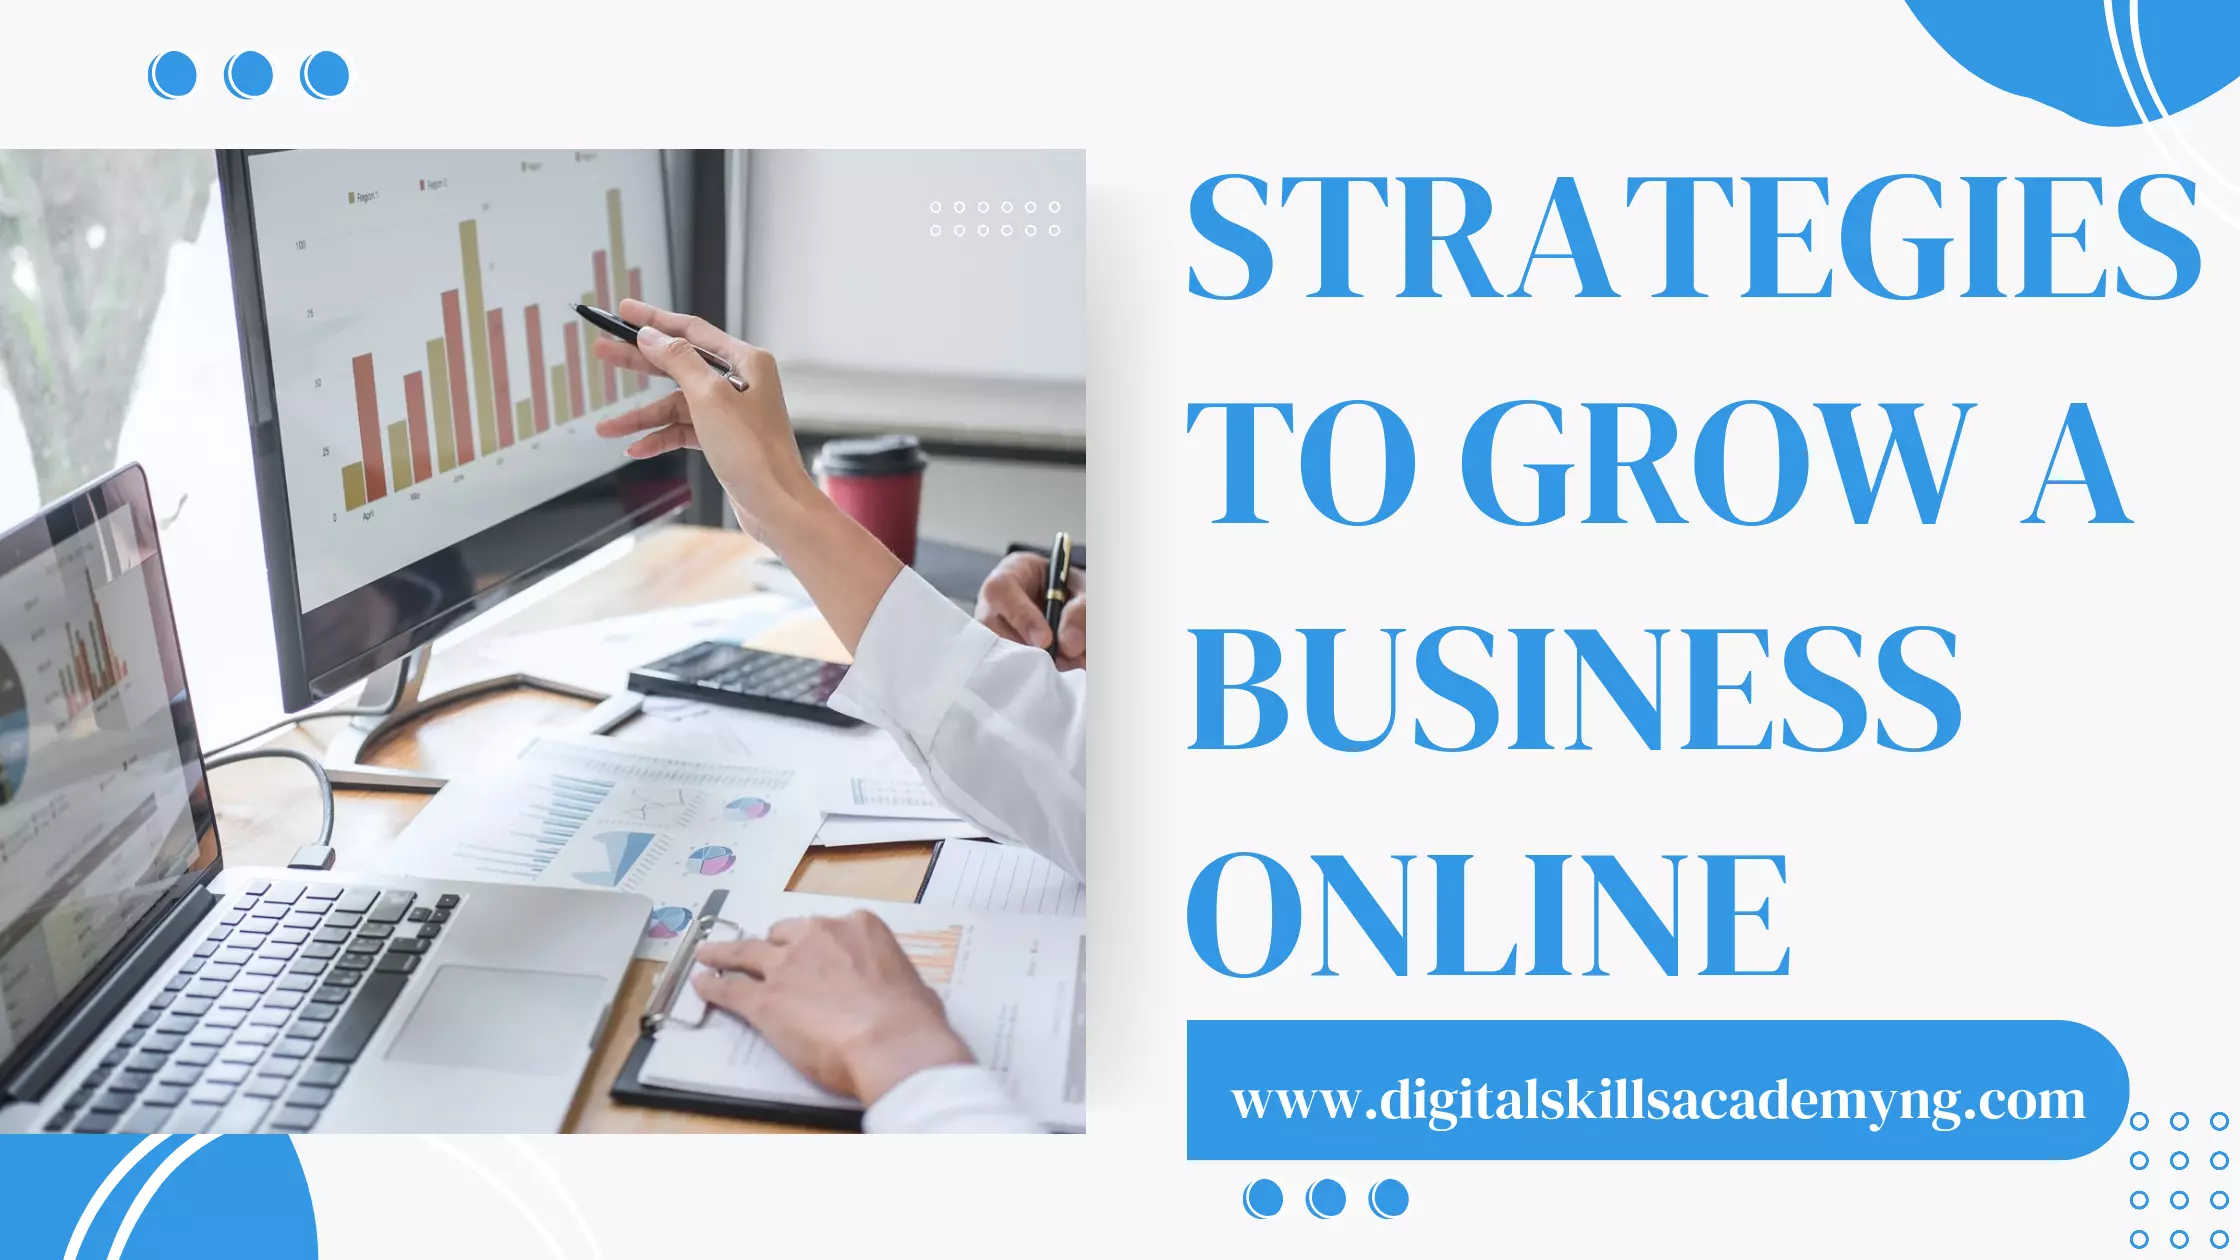 You are currently viewing Strategies to Grow a Business Online